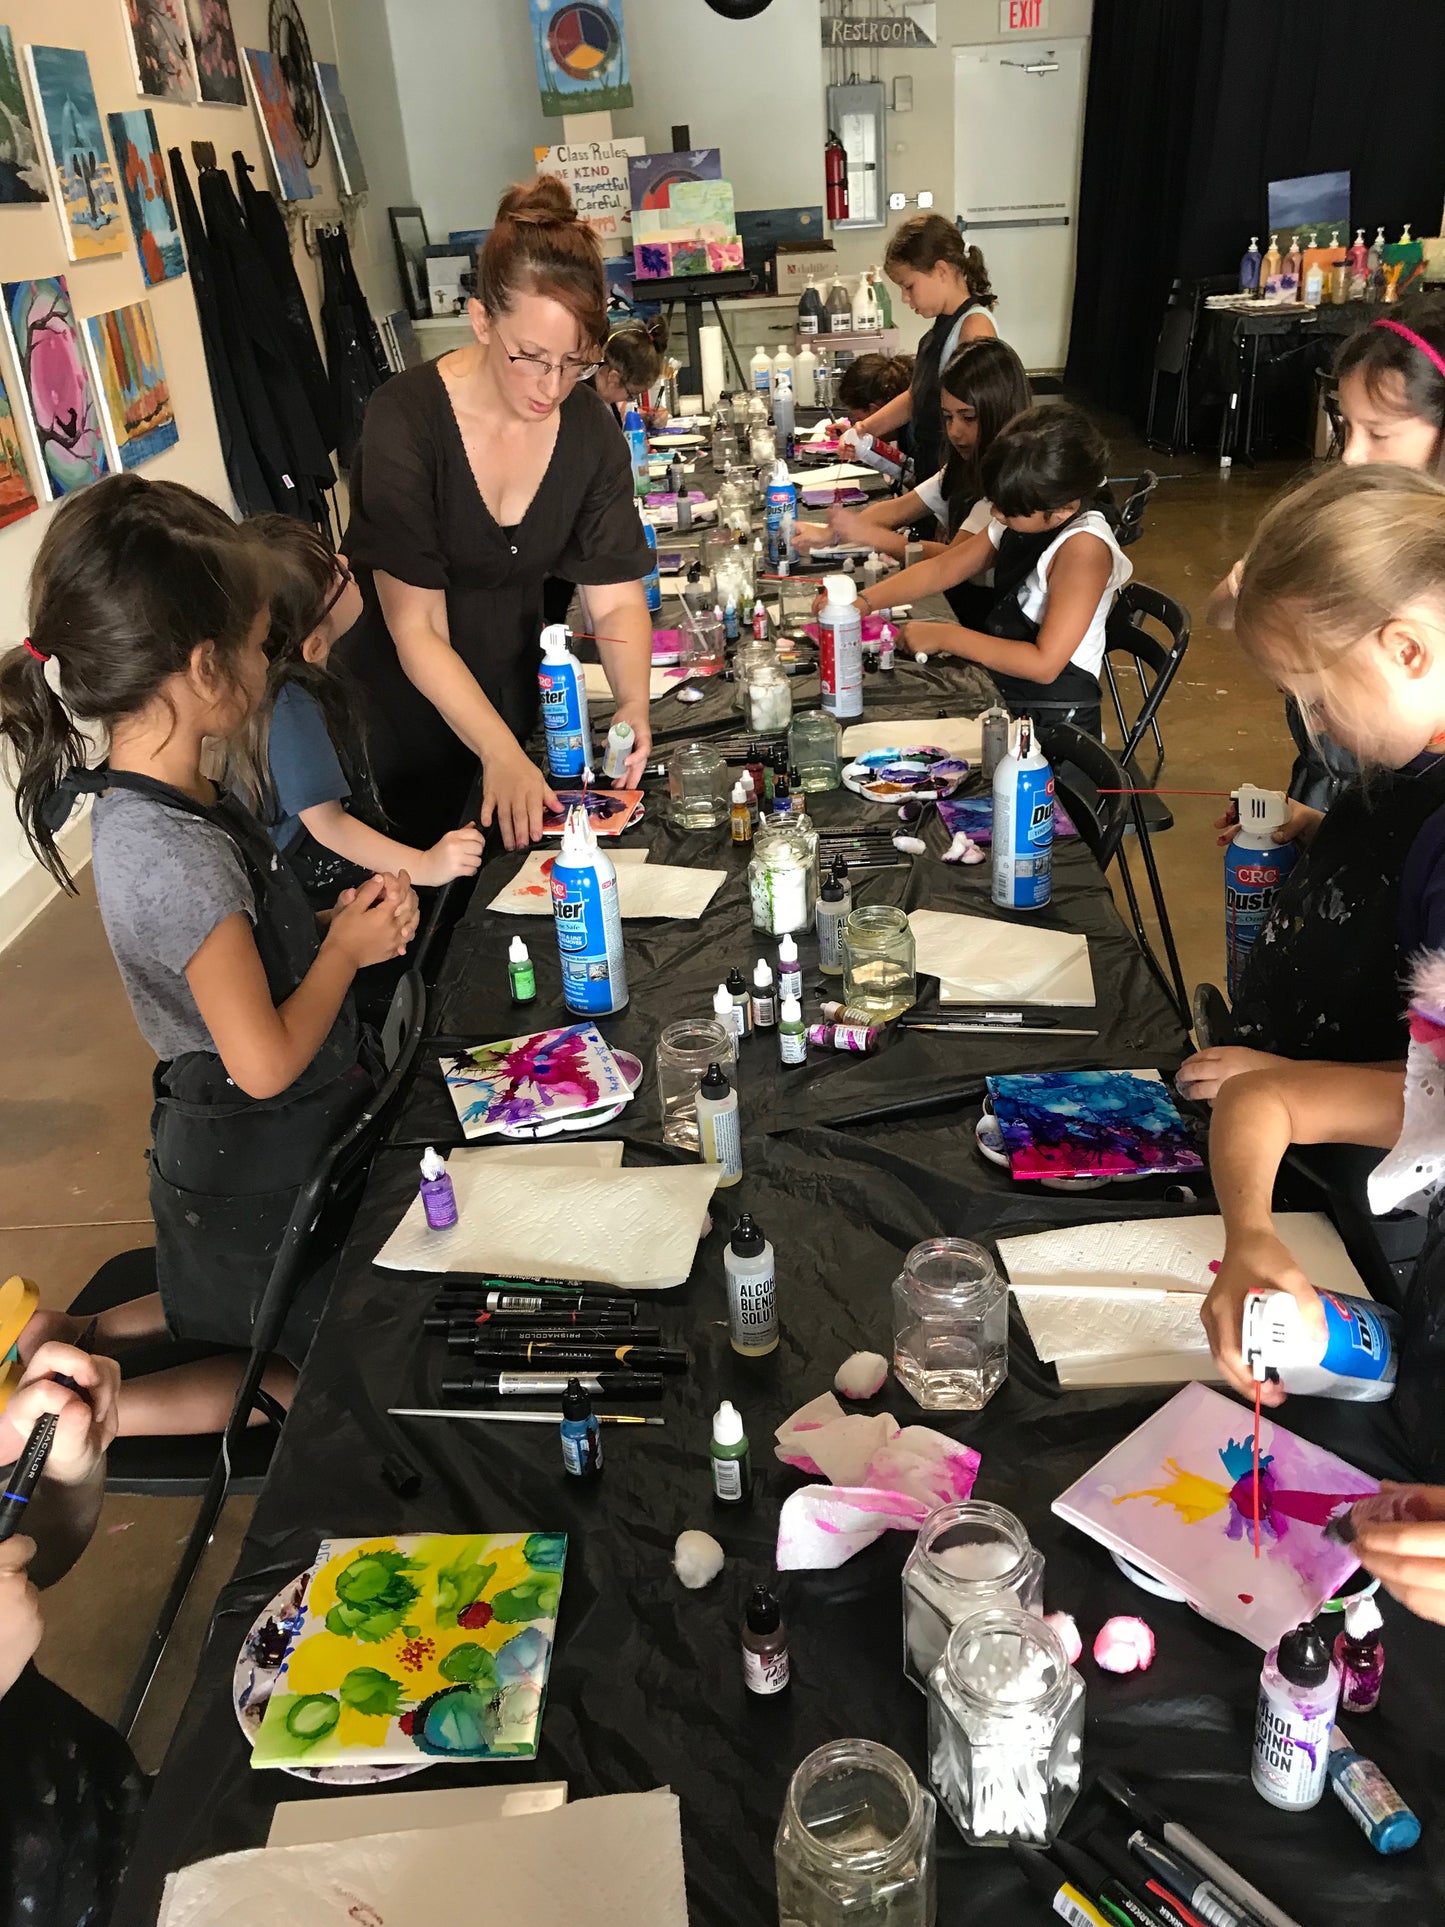 Wed, May 22, 4-6p “Kids Paint on Tiles” Public Houston Painting Class